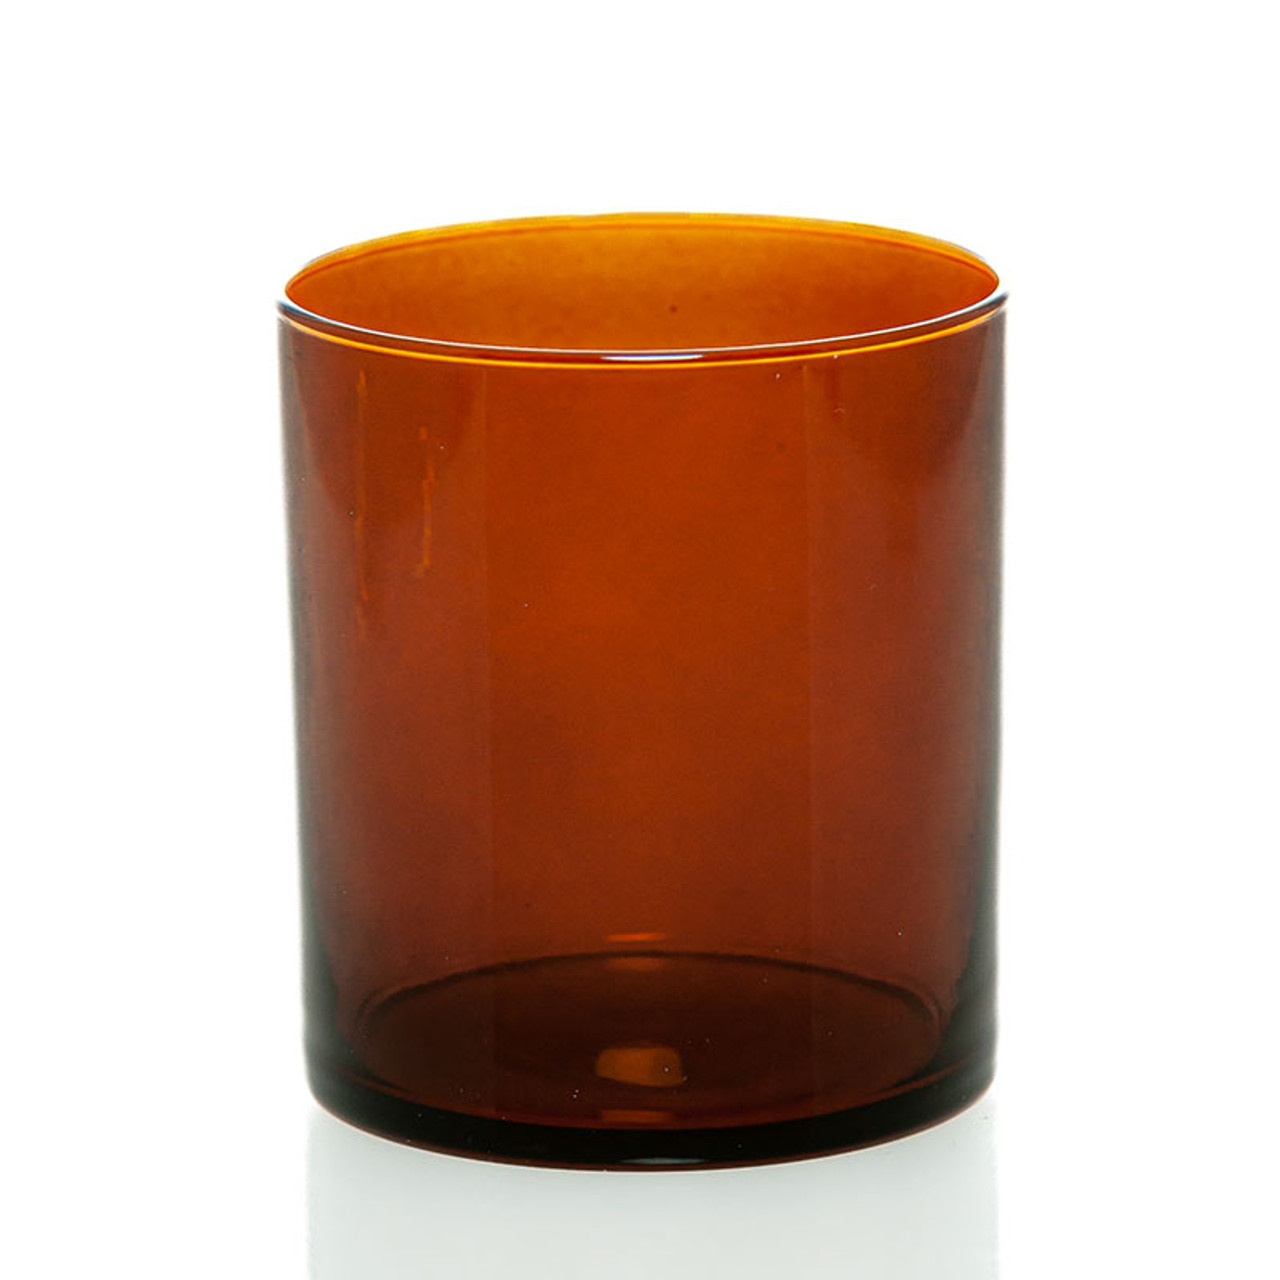 https://cdn11.bigcommerce.com/s-znjh1s2dil/images/stencil/1280w/products/196/414/12-oz-amber-jar__35383.1677272653.jpg